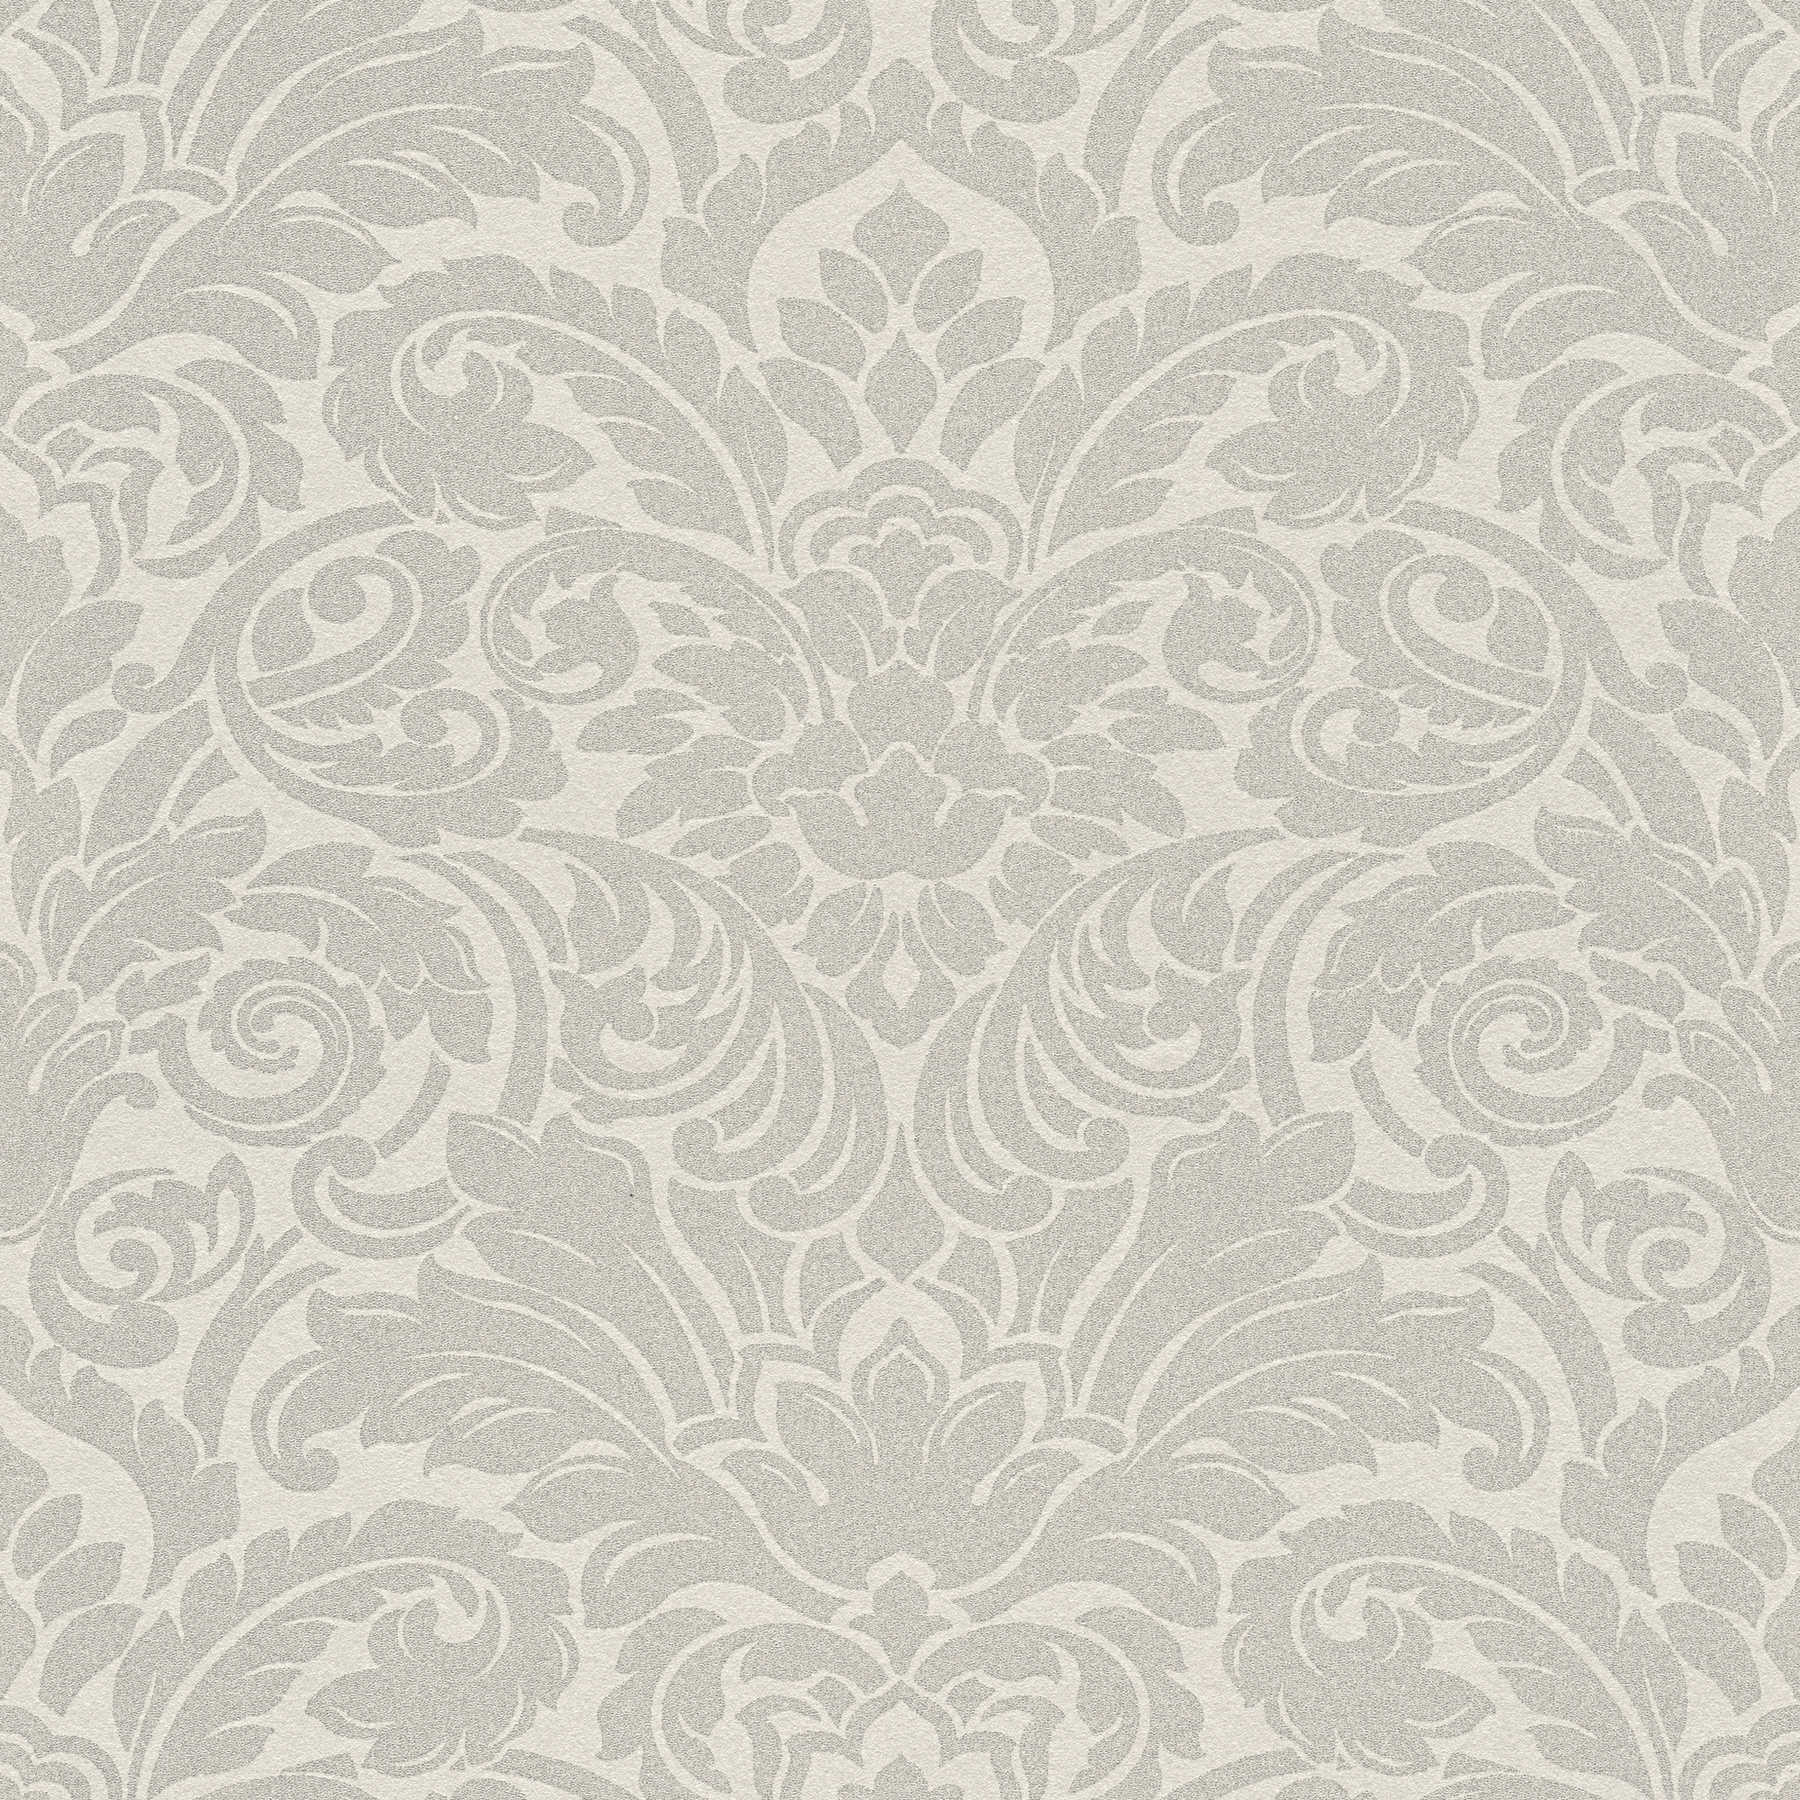 Ornamental wallpaper with metallic effect and floral design - silver, cream
